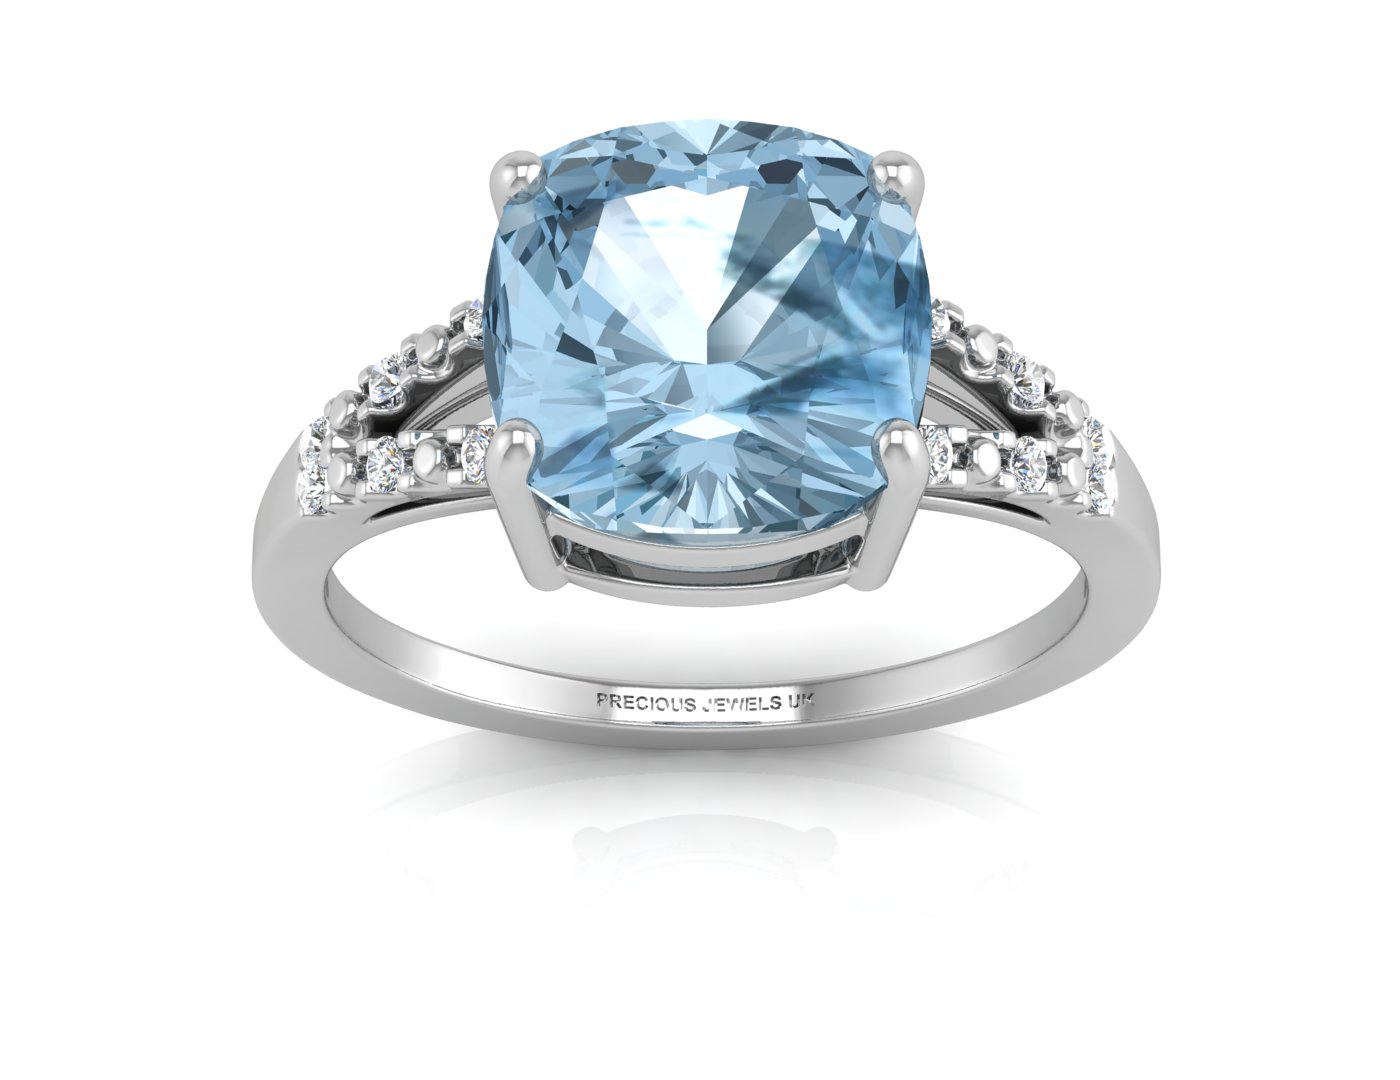 9ct White Gold Cushion Cut Blue Topaz With Diamond Set Shoulders Ring - Image 3 of 5